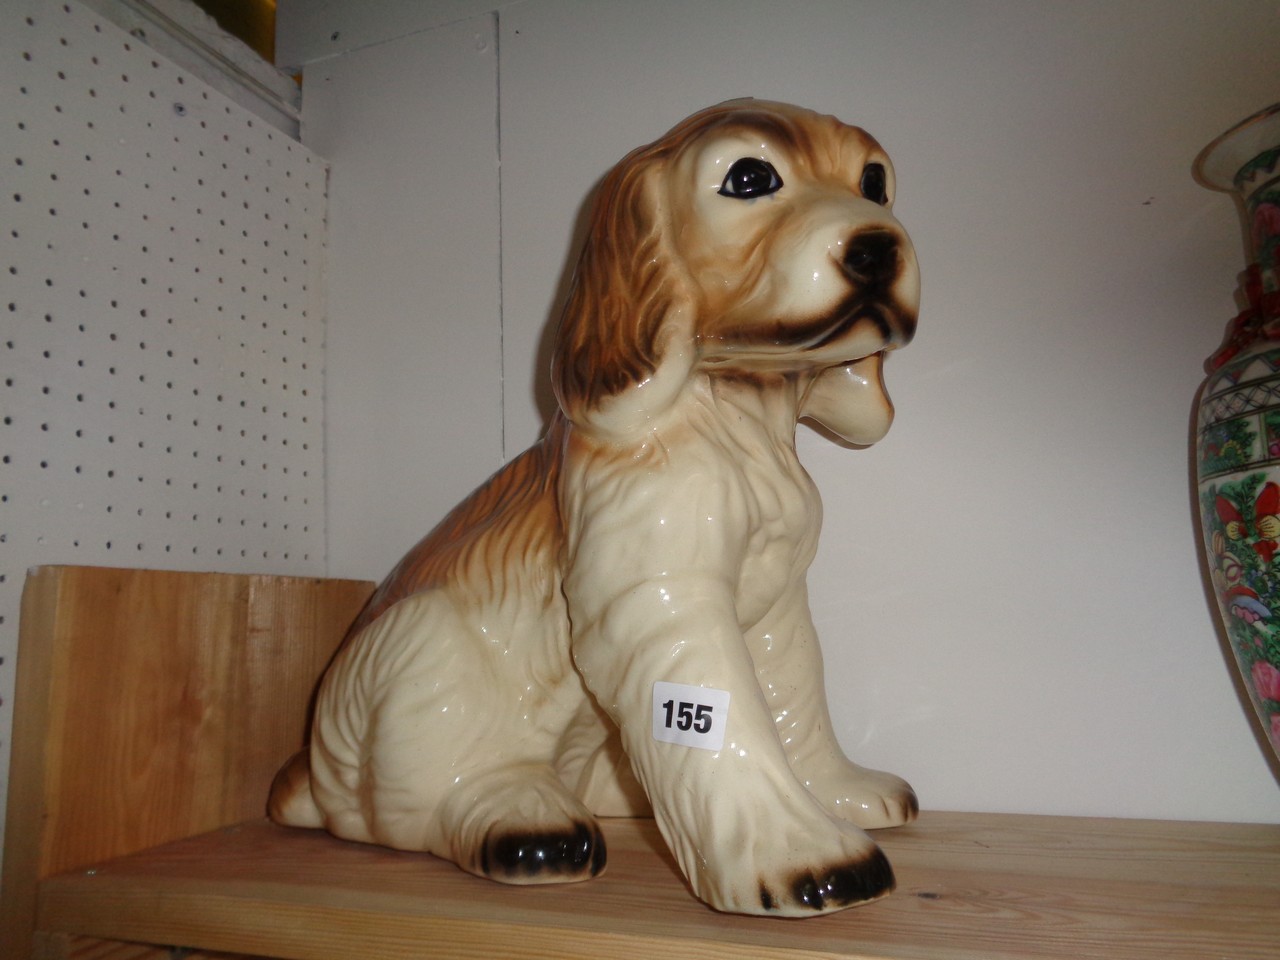 20thC Pottery figure of a Puppy with glazed finish